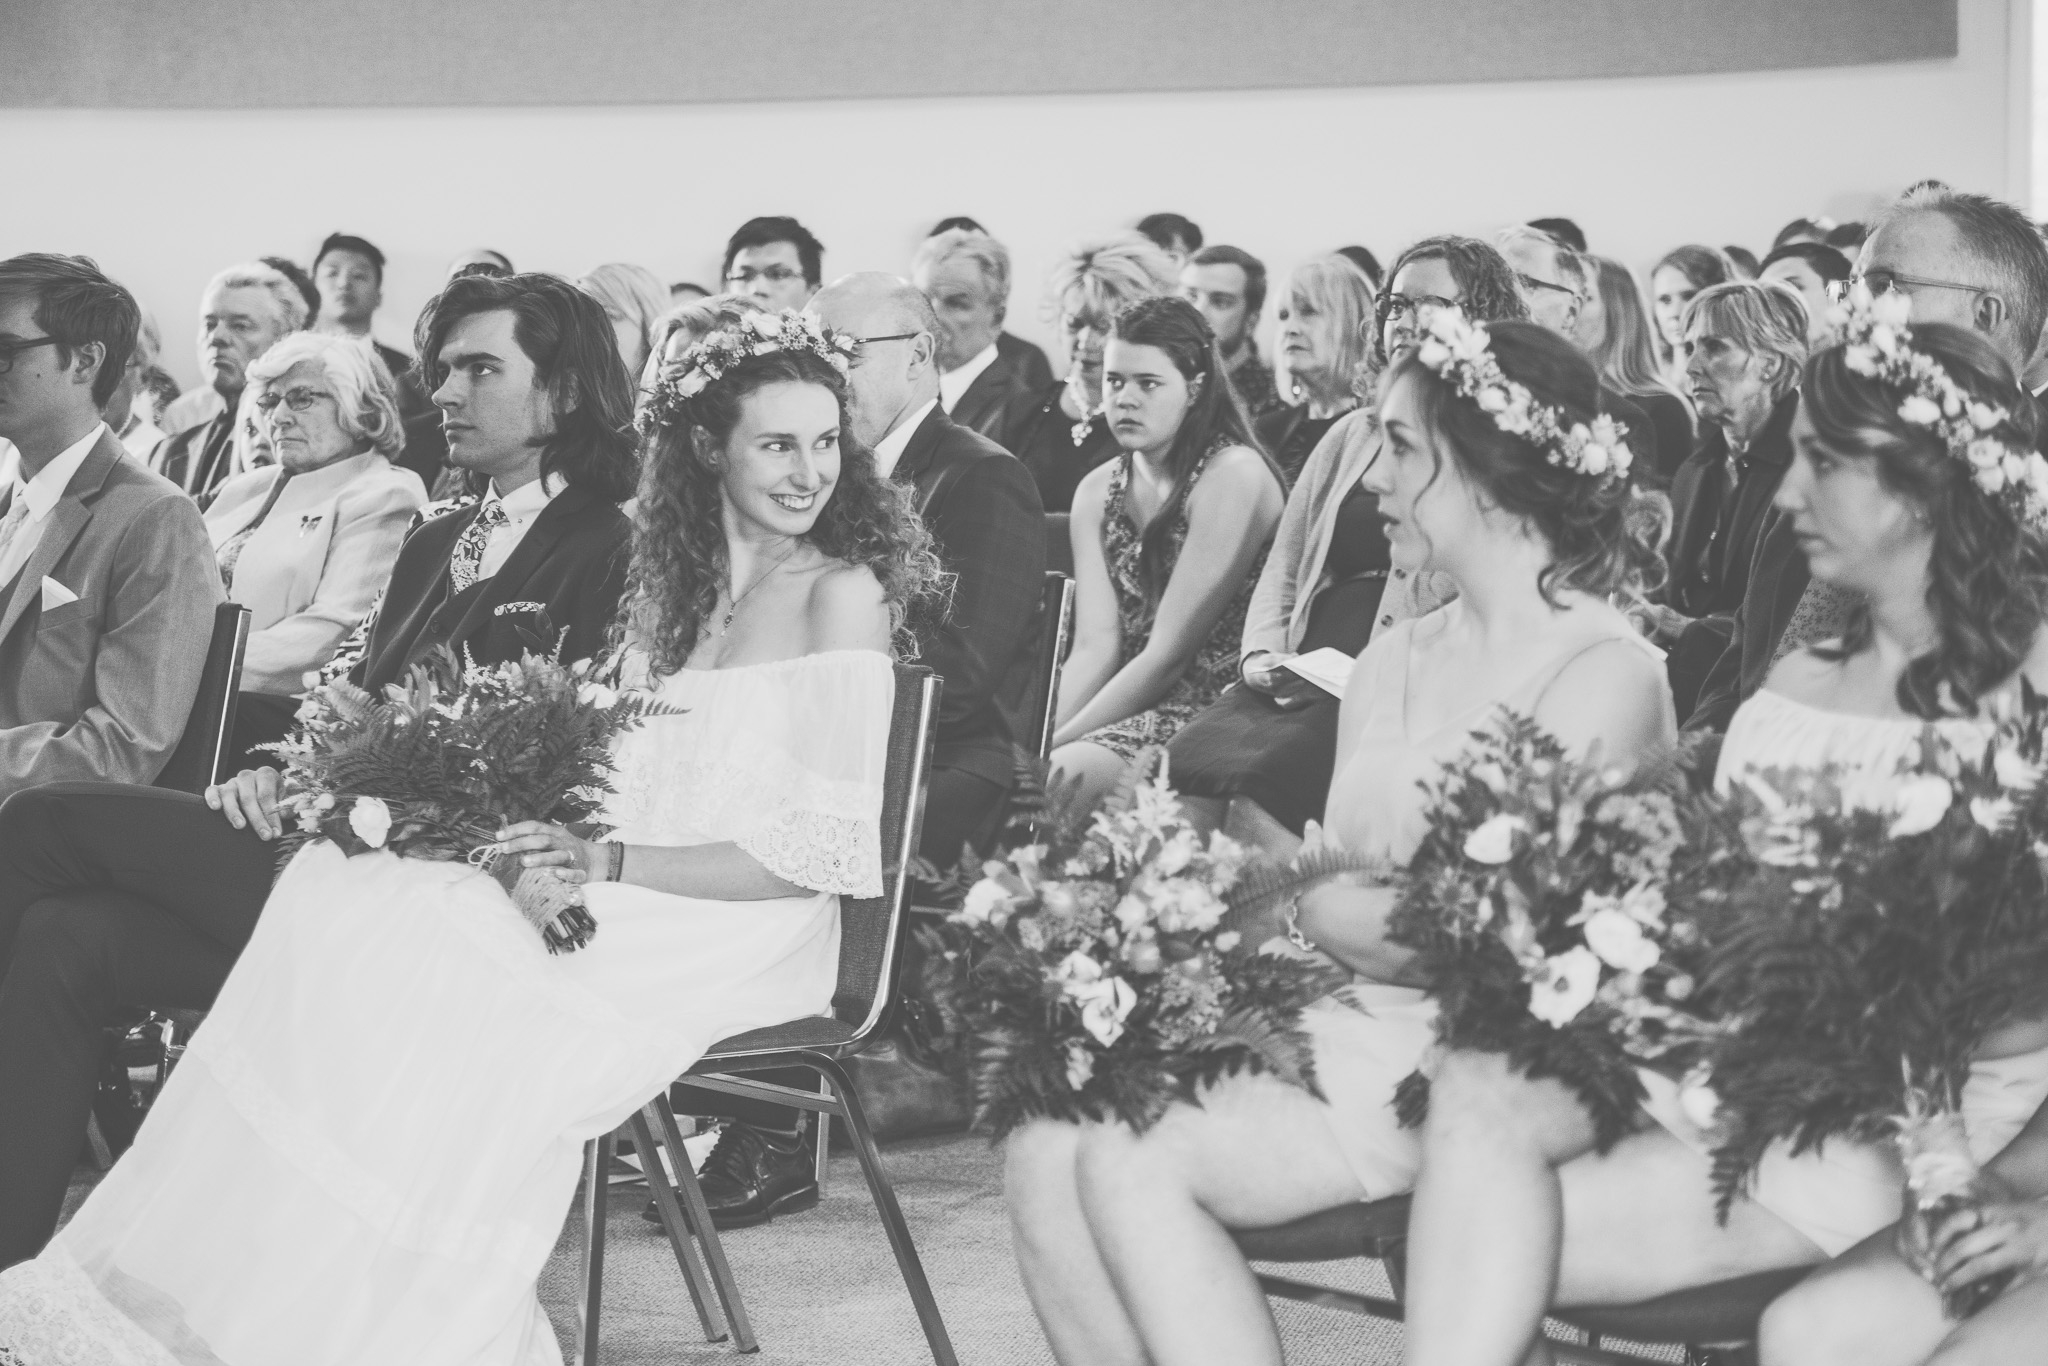 wedding, barrie wedding, barrie photographer, toronto photographer, barrie wedding photographer, toronto wedding photographer, jeannette breward photography, church, church wedding, waterfront, waterfront wedding, spring wedding, ontario wedding, couple, floral crown, religious ceremony, boho bride, boho wedding, bohemian wedding, floral crown, emotional, emotions, emotional wedding, black and white, ceremony, bridesmaids, wedding party, church, ceremony